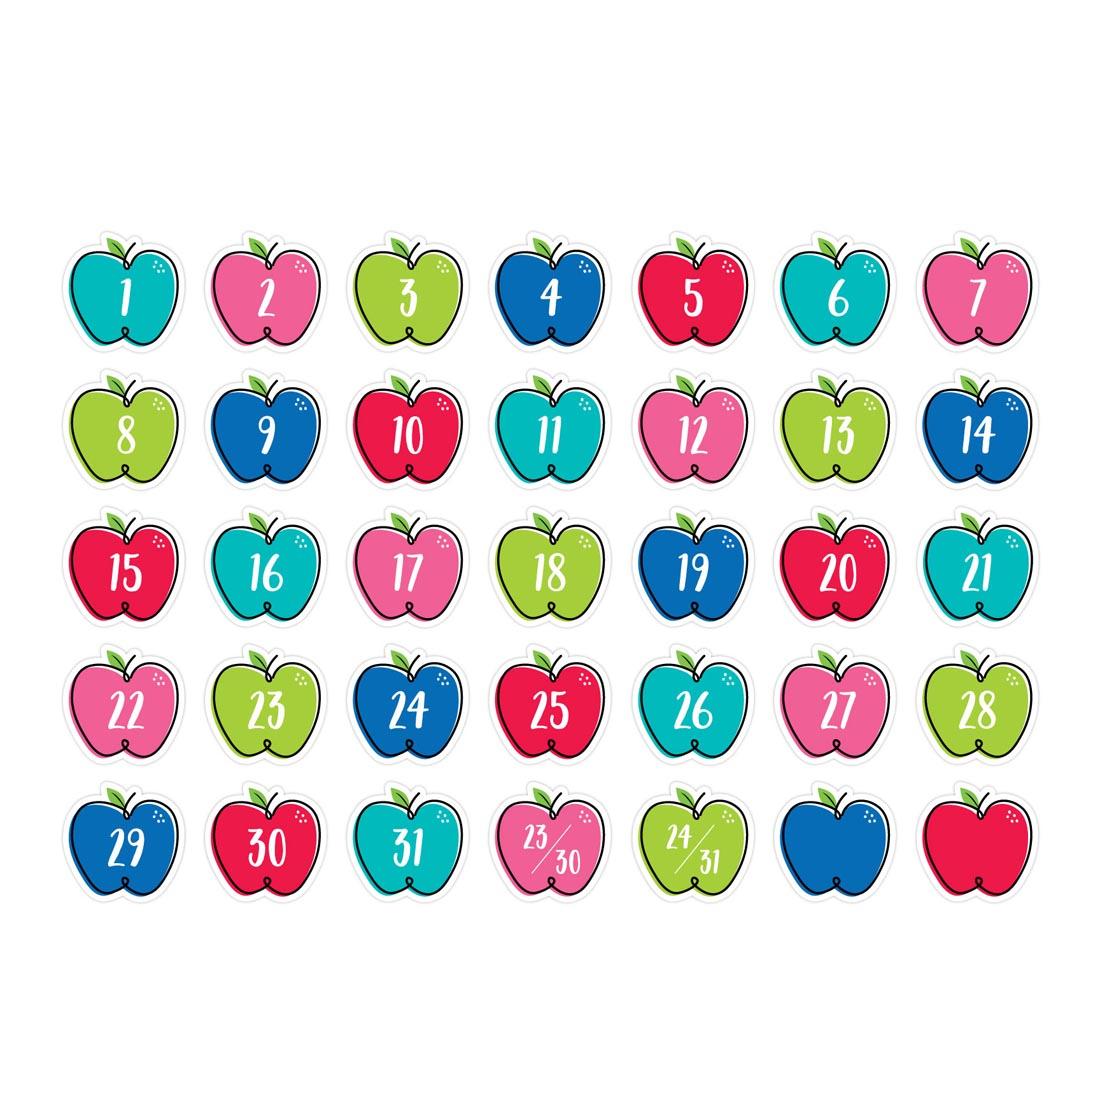 Doodle Apples Calendar Days from the Core Decor collection by Creative Teaching Press